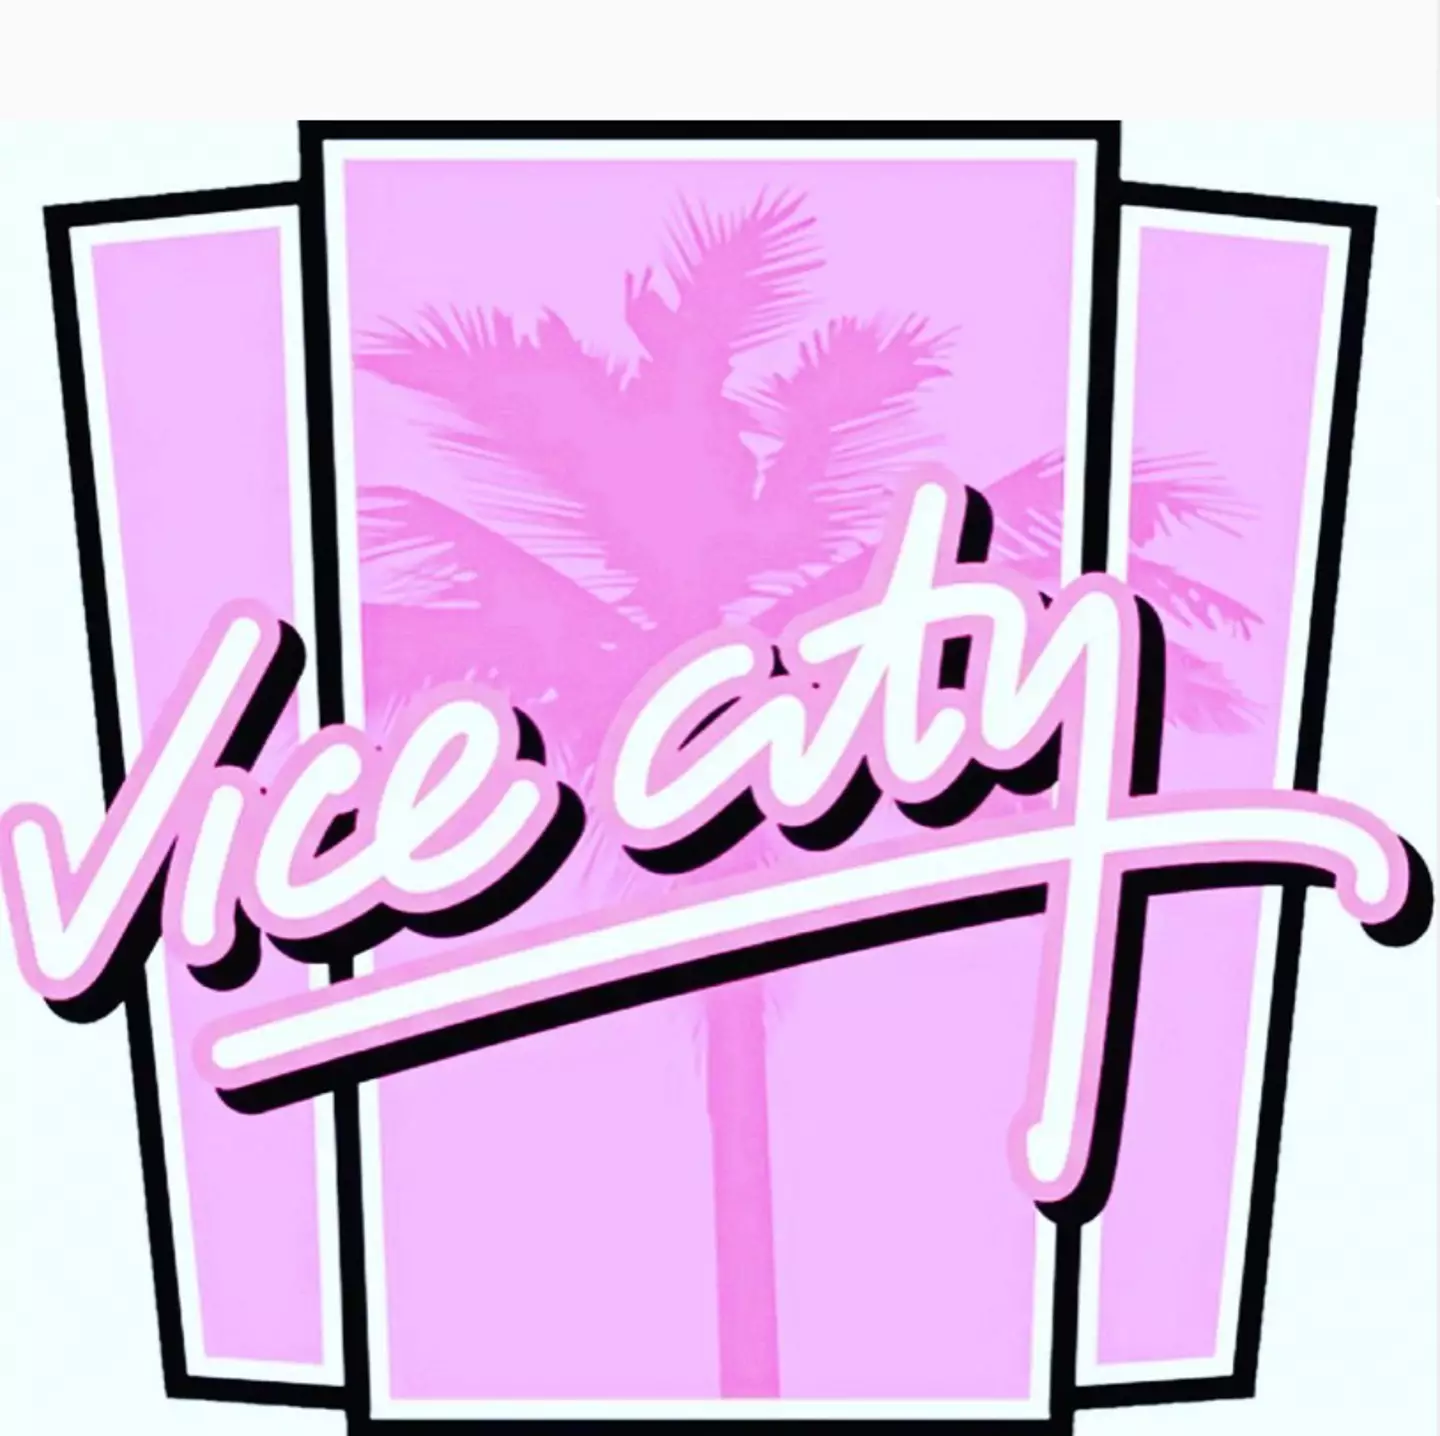 50 Cent teased fans with a Vice City logo.